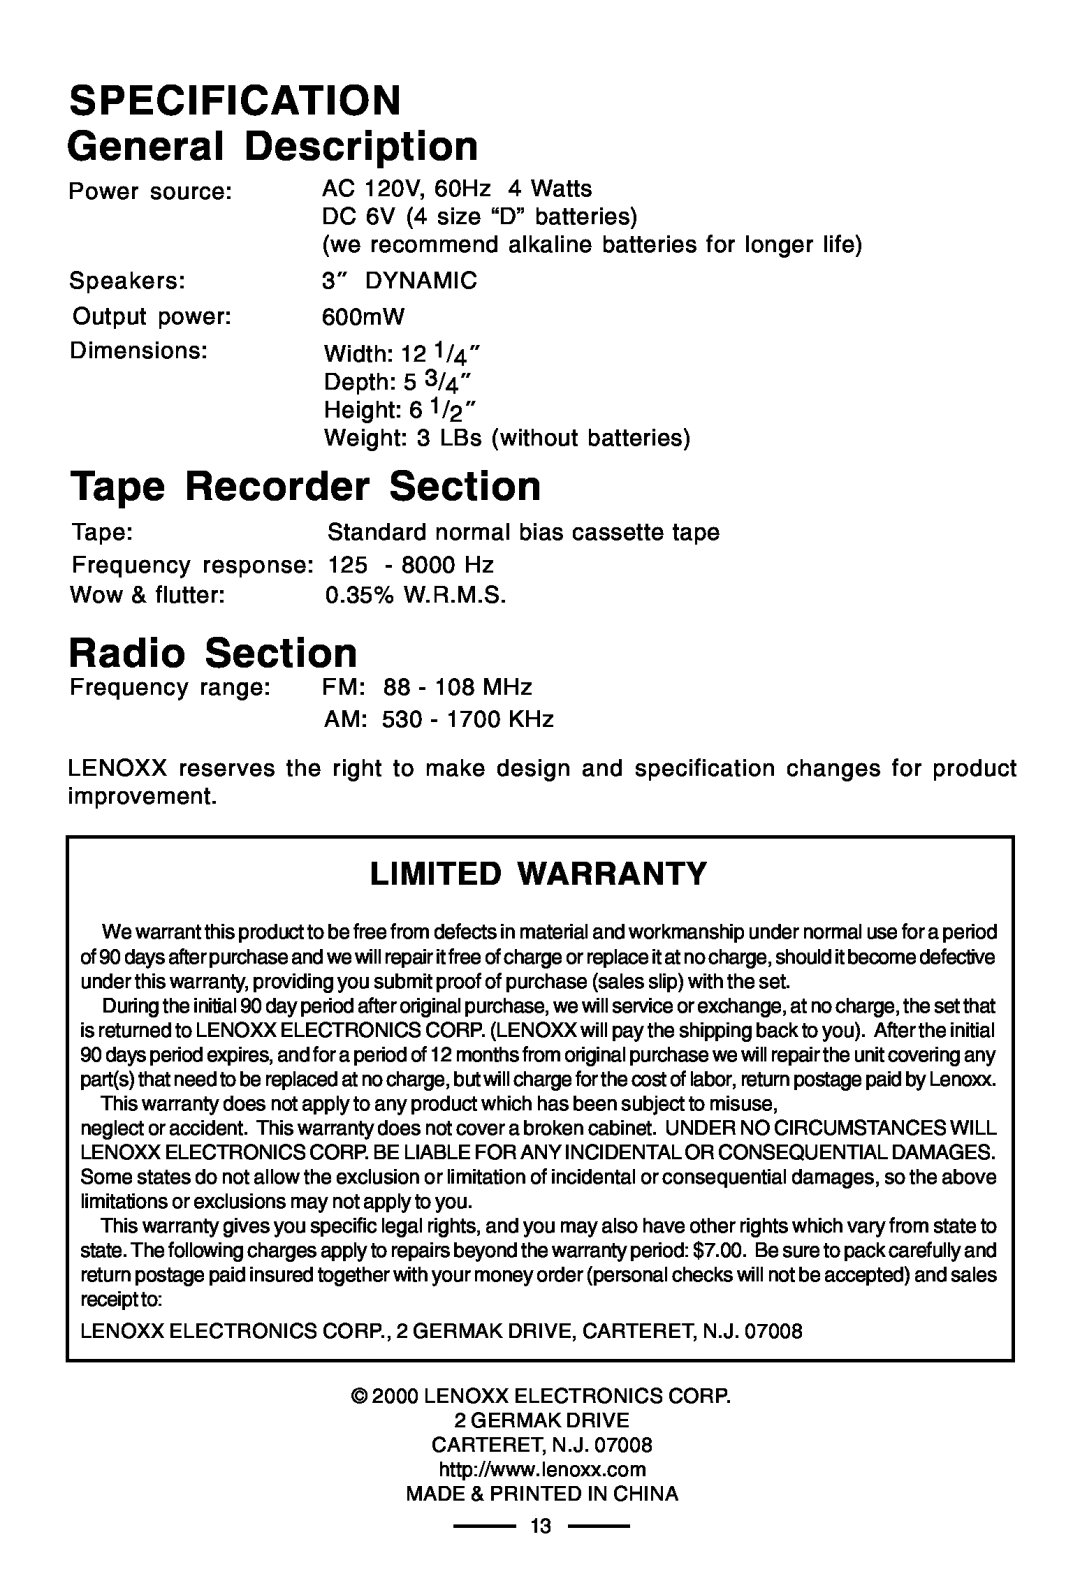 Lenoxx Electronics CT-99 SPECIFICATION General Description, Tape Recorder Section, Radio Section, Limited Warranty 